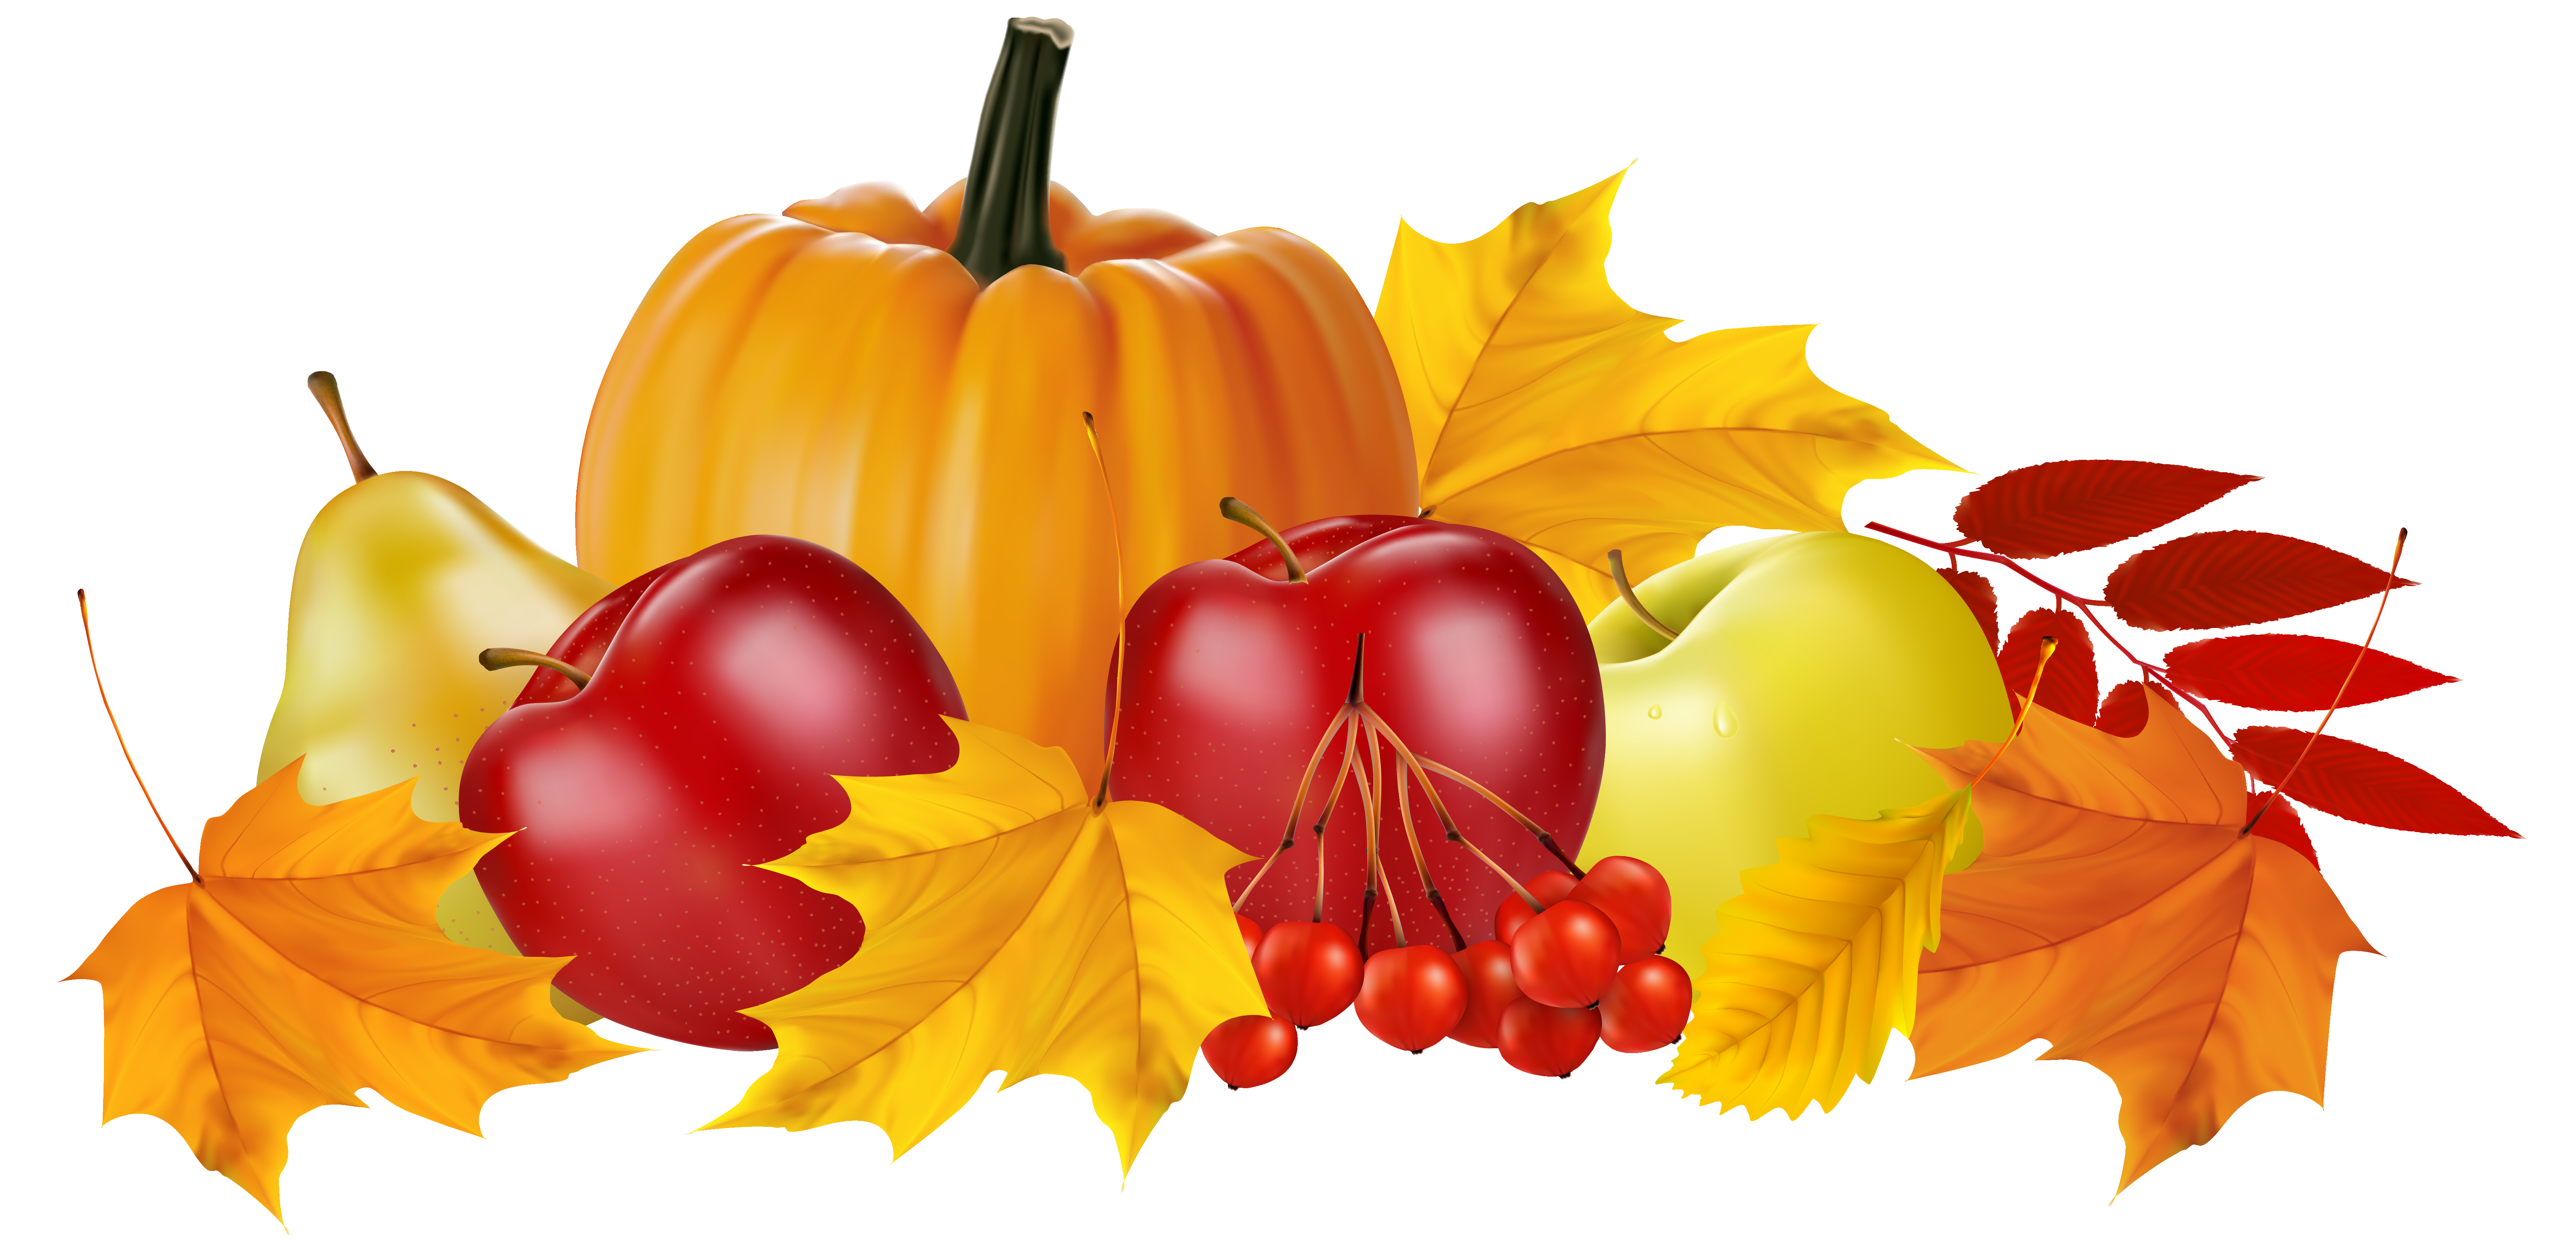 Autumn Pumpkin and Fruits PNG Clipart Image 